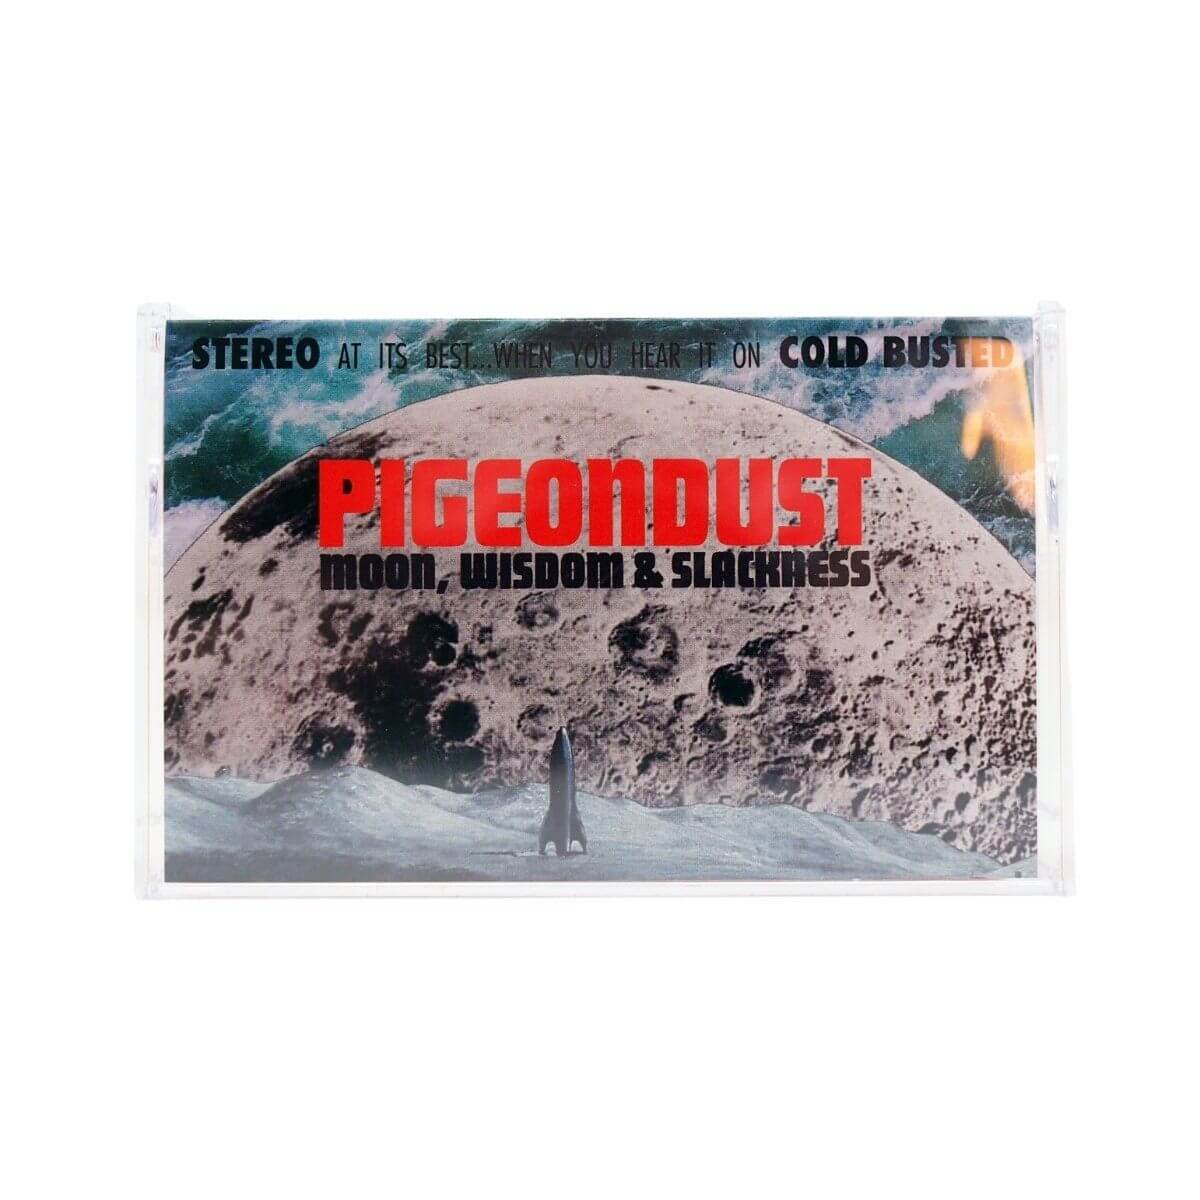 Pigeondust - Moon, Wisdom & Slackness - Limited Edition Cassette Repressed - Cold Busted